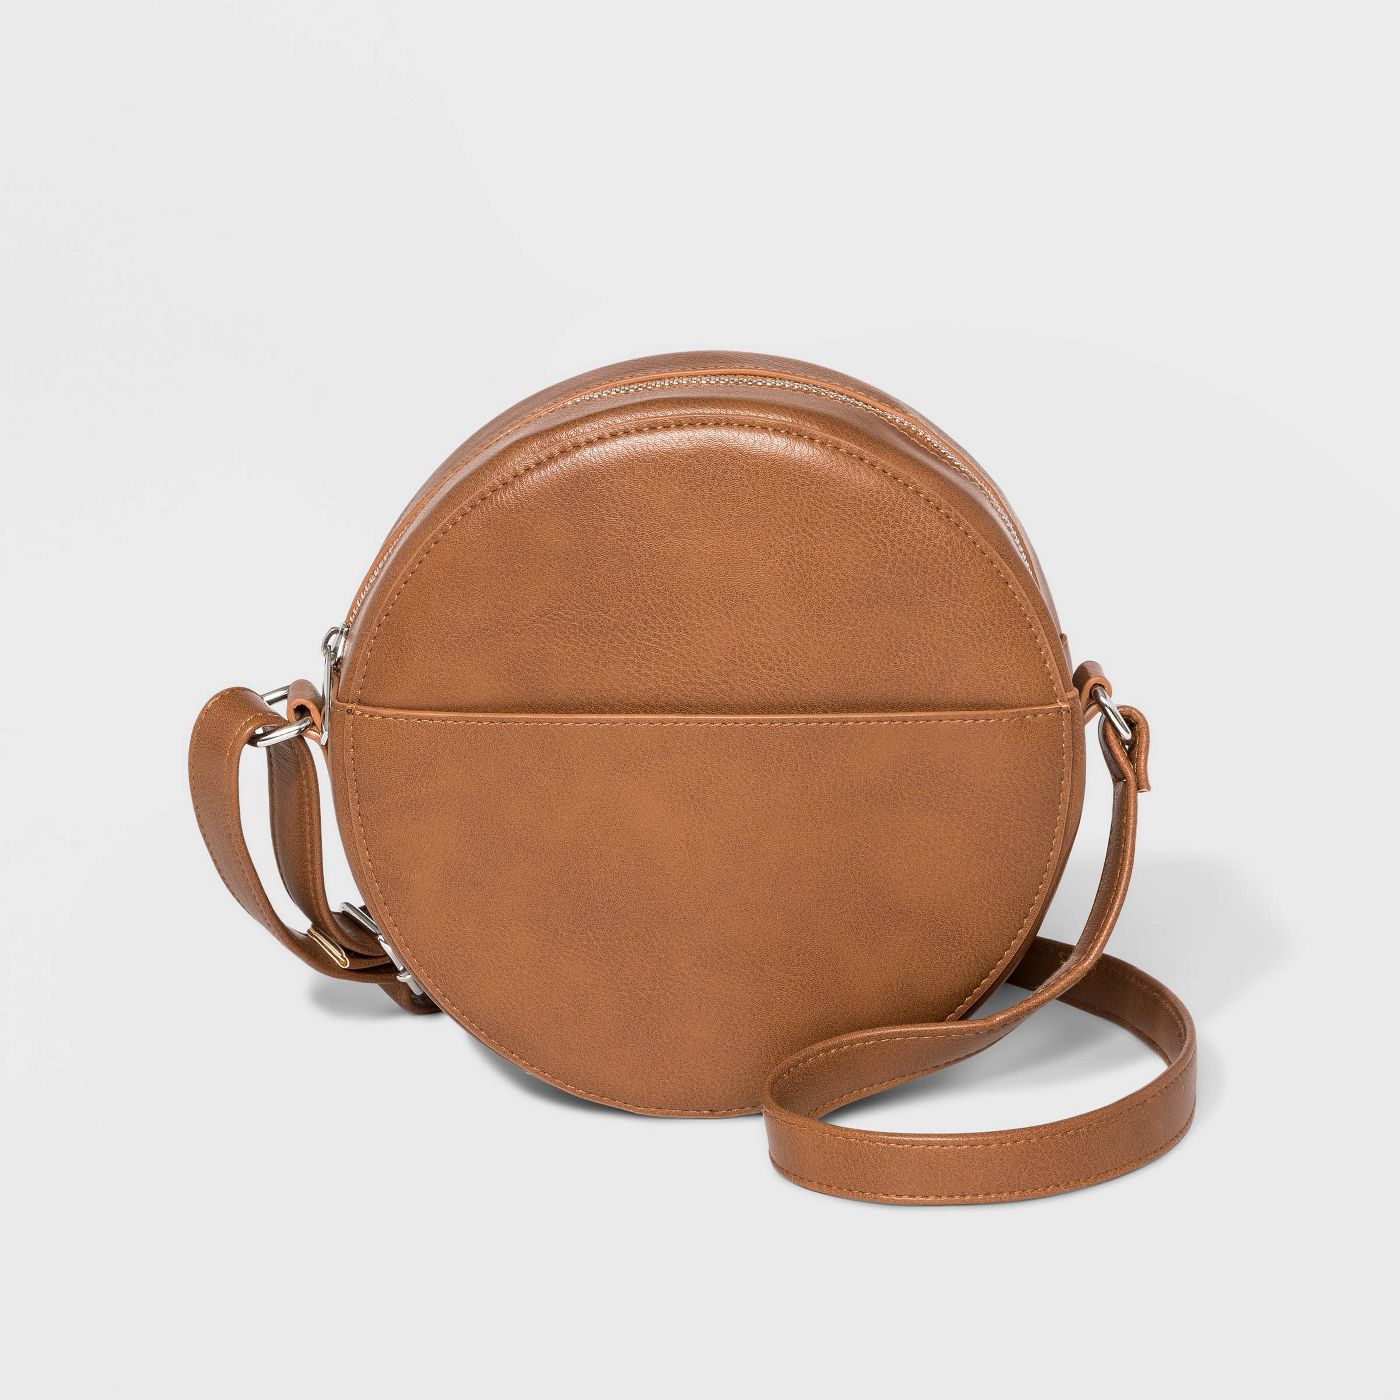 Canteen Crossbody Bag - Wild Fable™ Brown - image 1 of 2